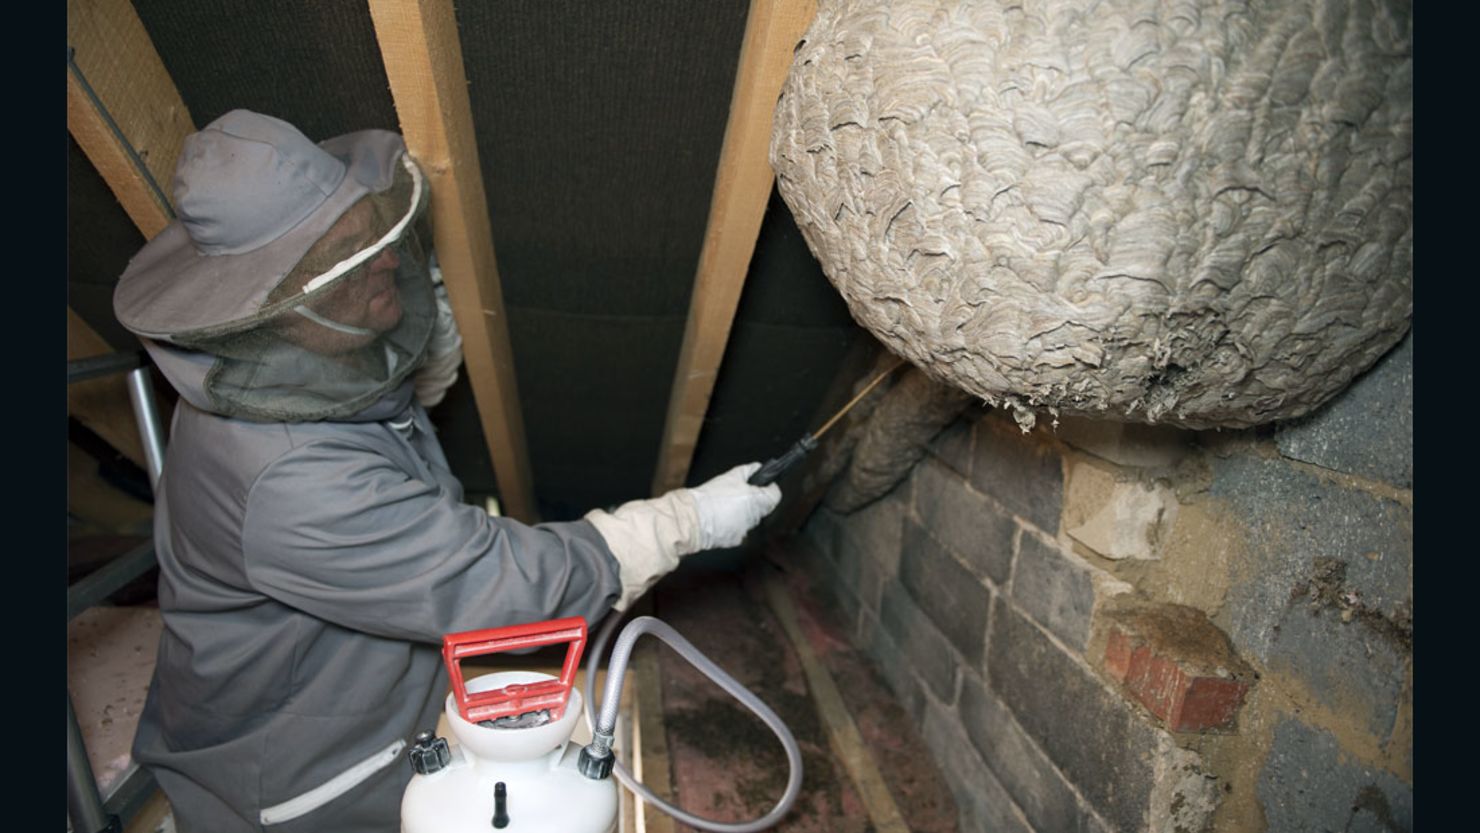 A pest control company discovered the gargantuan wasp nest